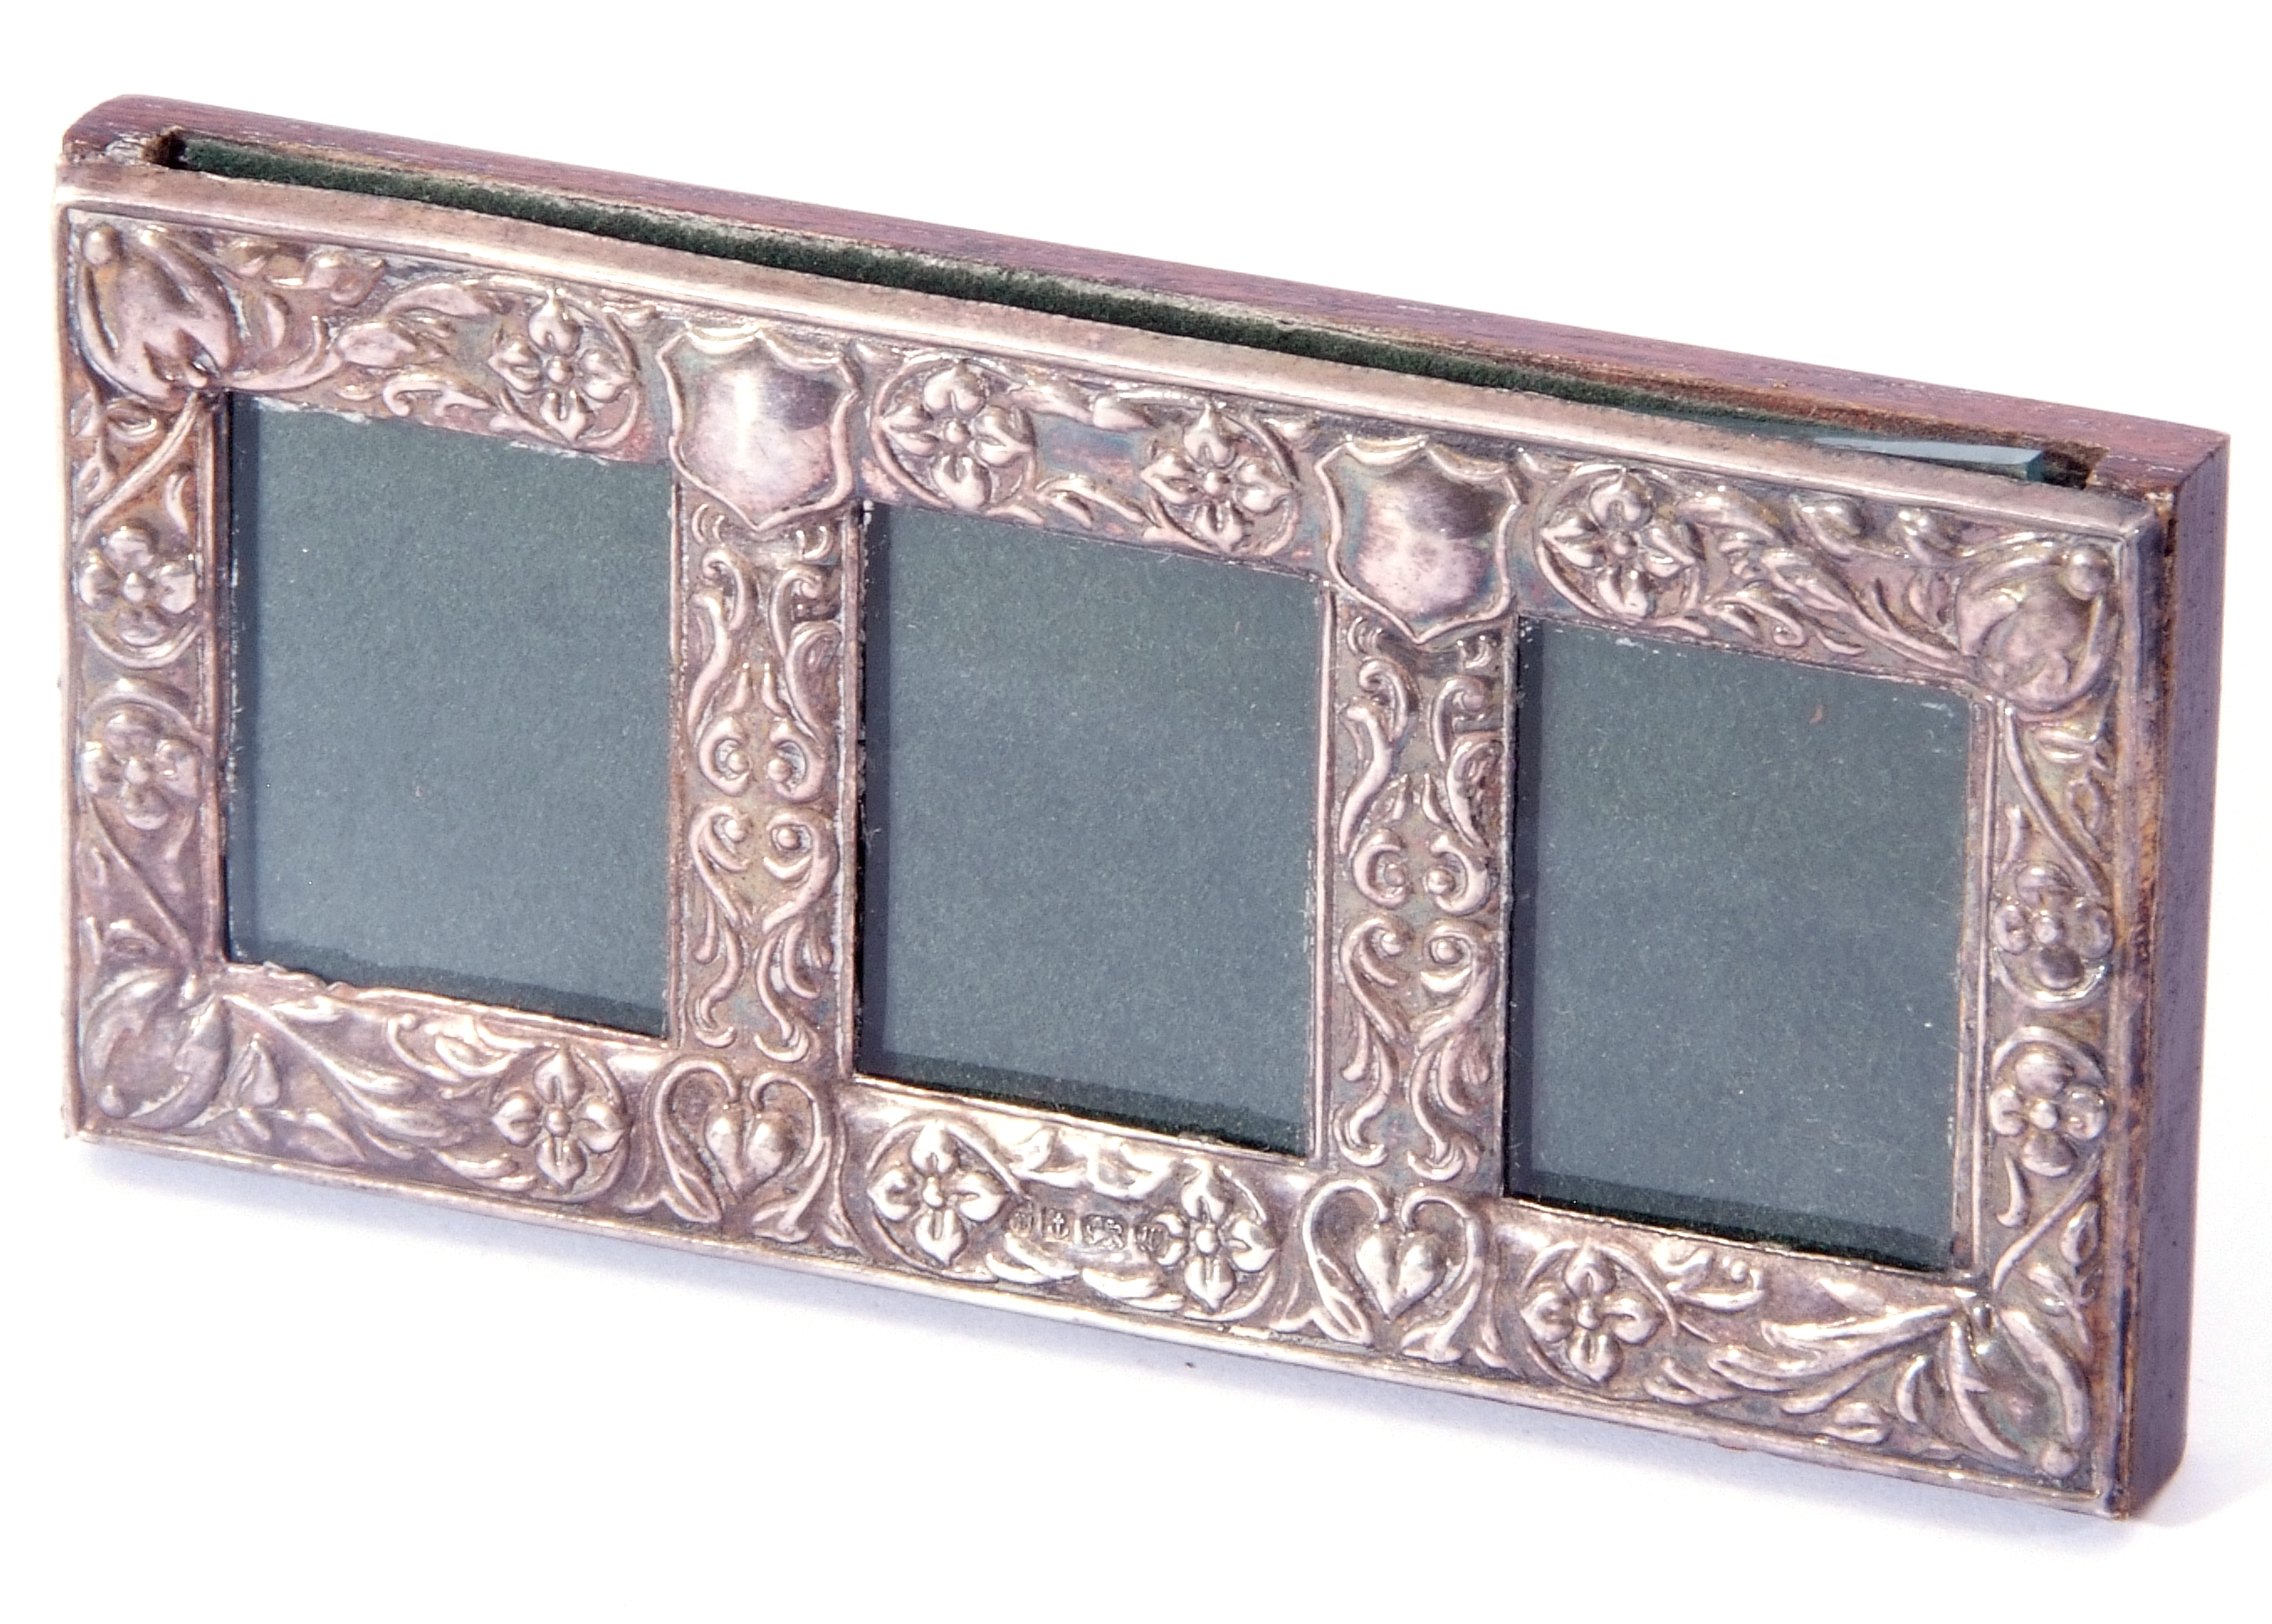 Elizabeth II silver triple glazed photo/stamp frame, embossed decorated with shields, flowers and - Image 4 of 4